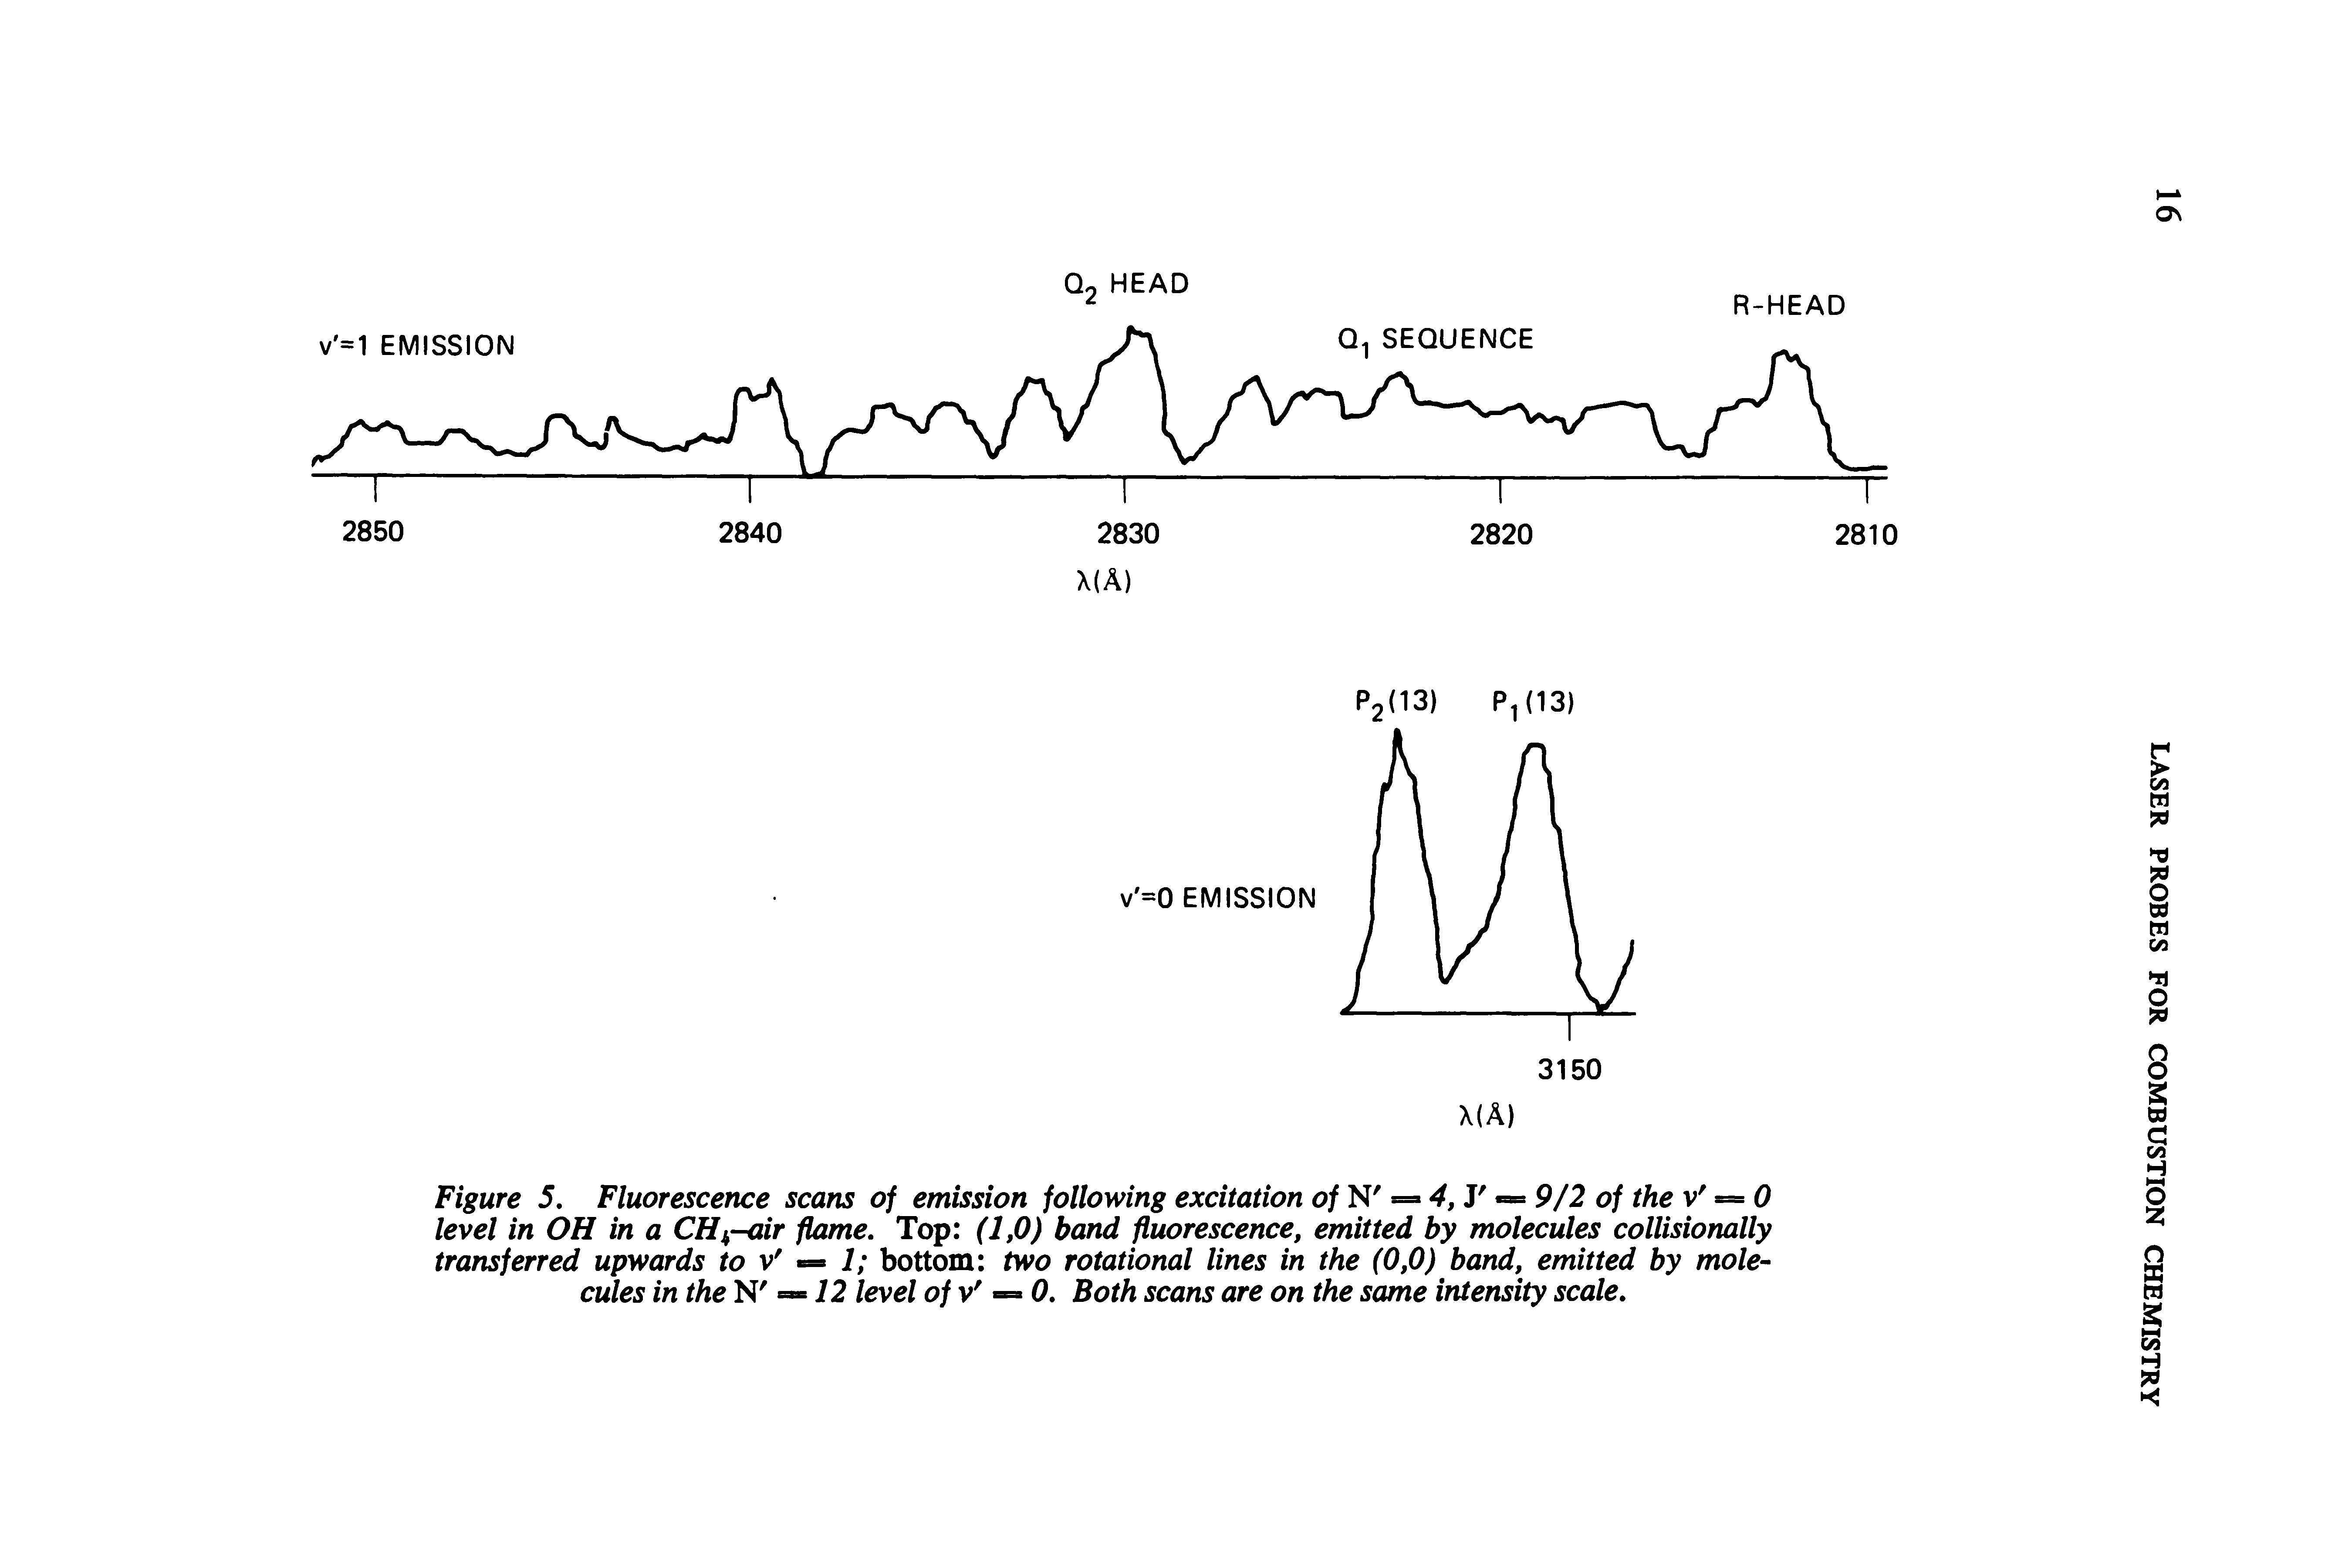 Figure 5. Fluorescence scans of emission following excitation of N = 4, J — 9/2 of the V = 0 level in OH in a CHk-air flame. Top (1,0) band fluorescence, emitted by molecules collisionally transferred upwards to v = 1 bottom two rotational lines in the (0,0) band, emitted by molecules in the N = = 12 level of V — 0. Both scans are on the same intensity scale.